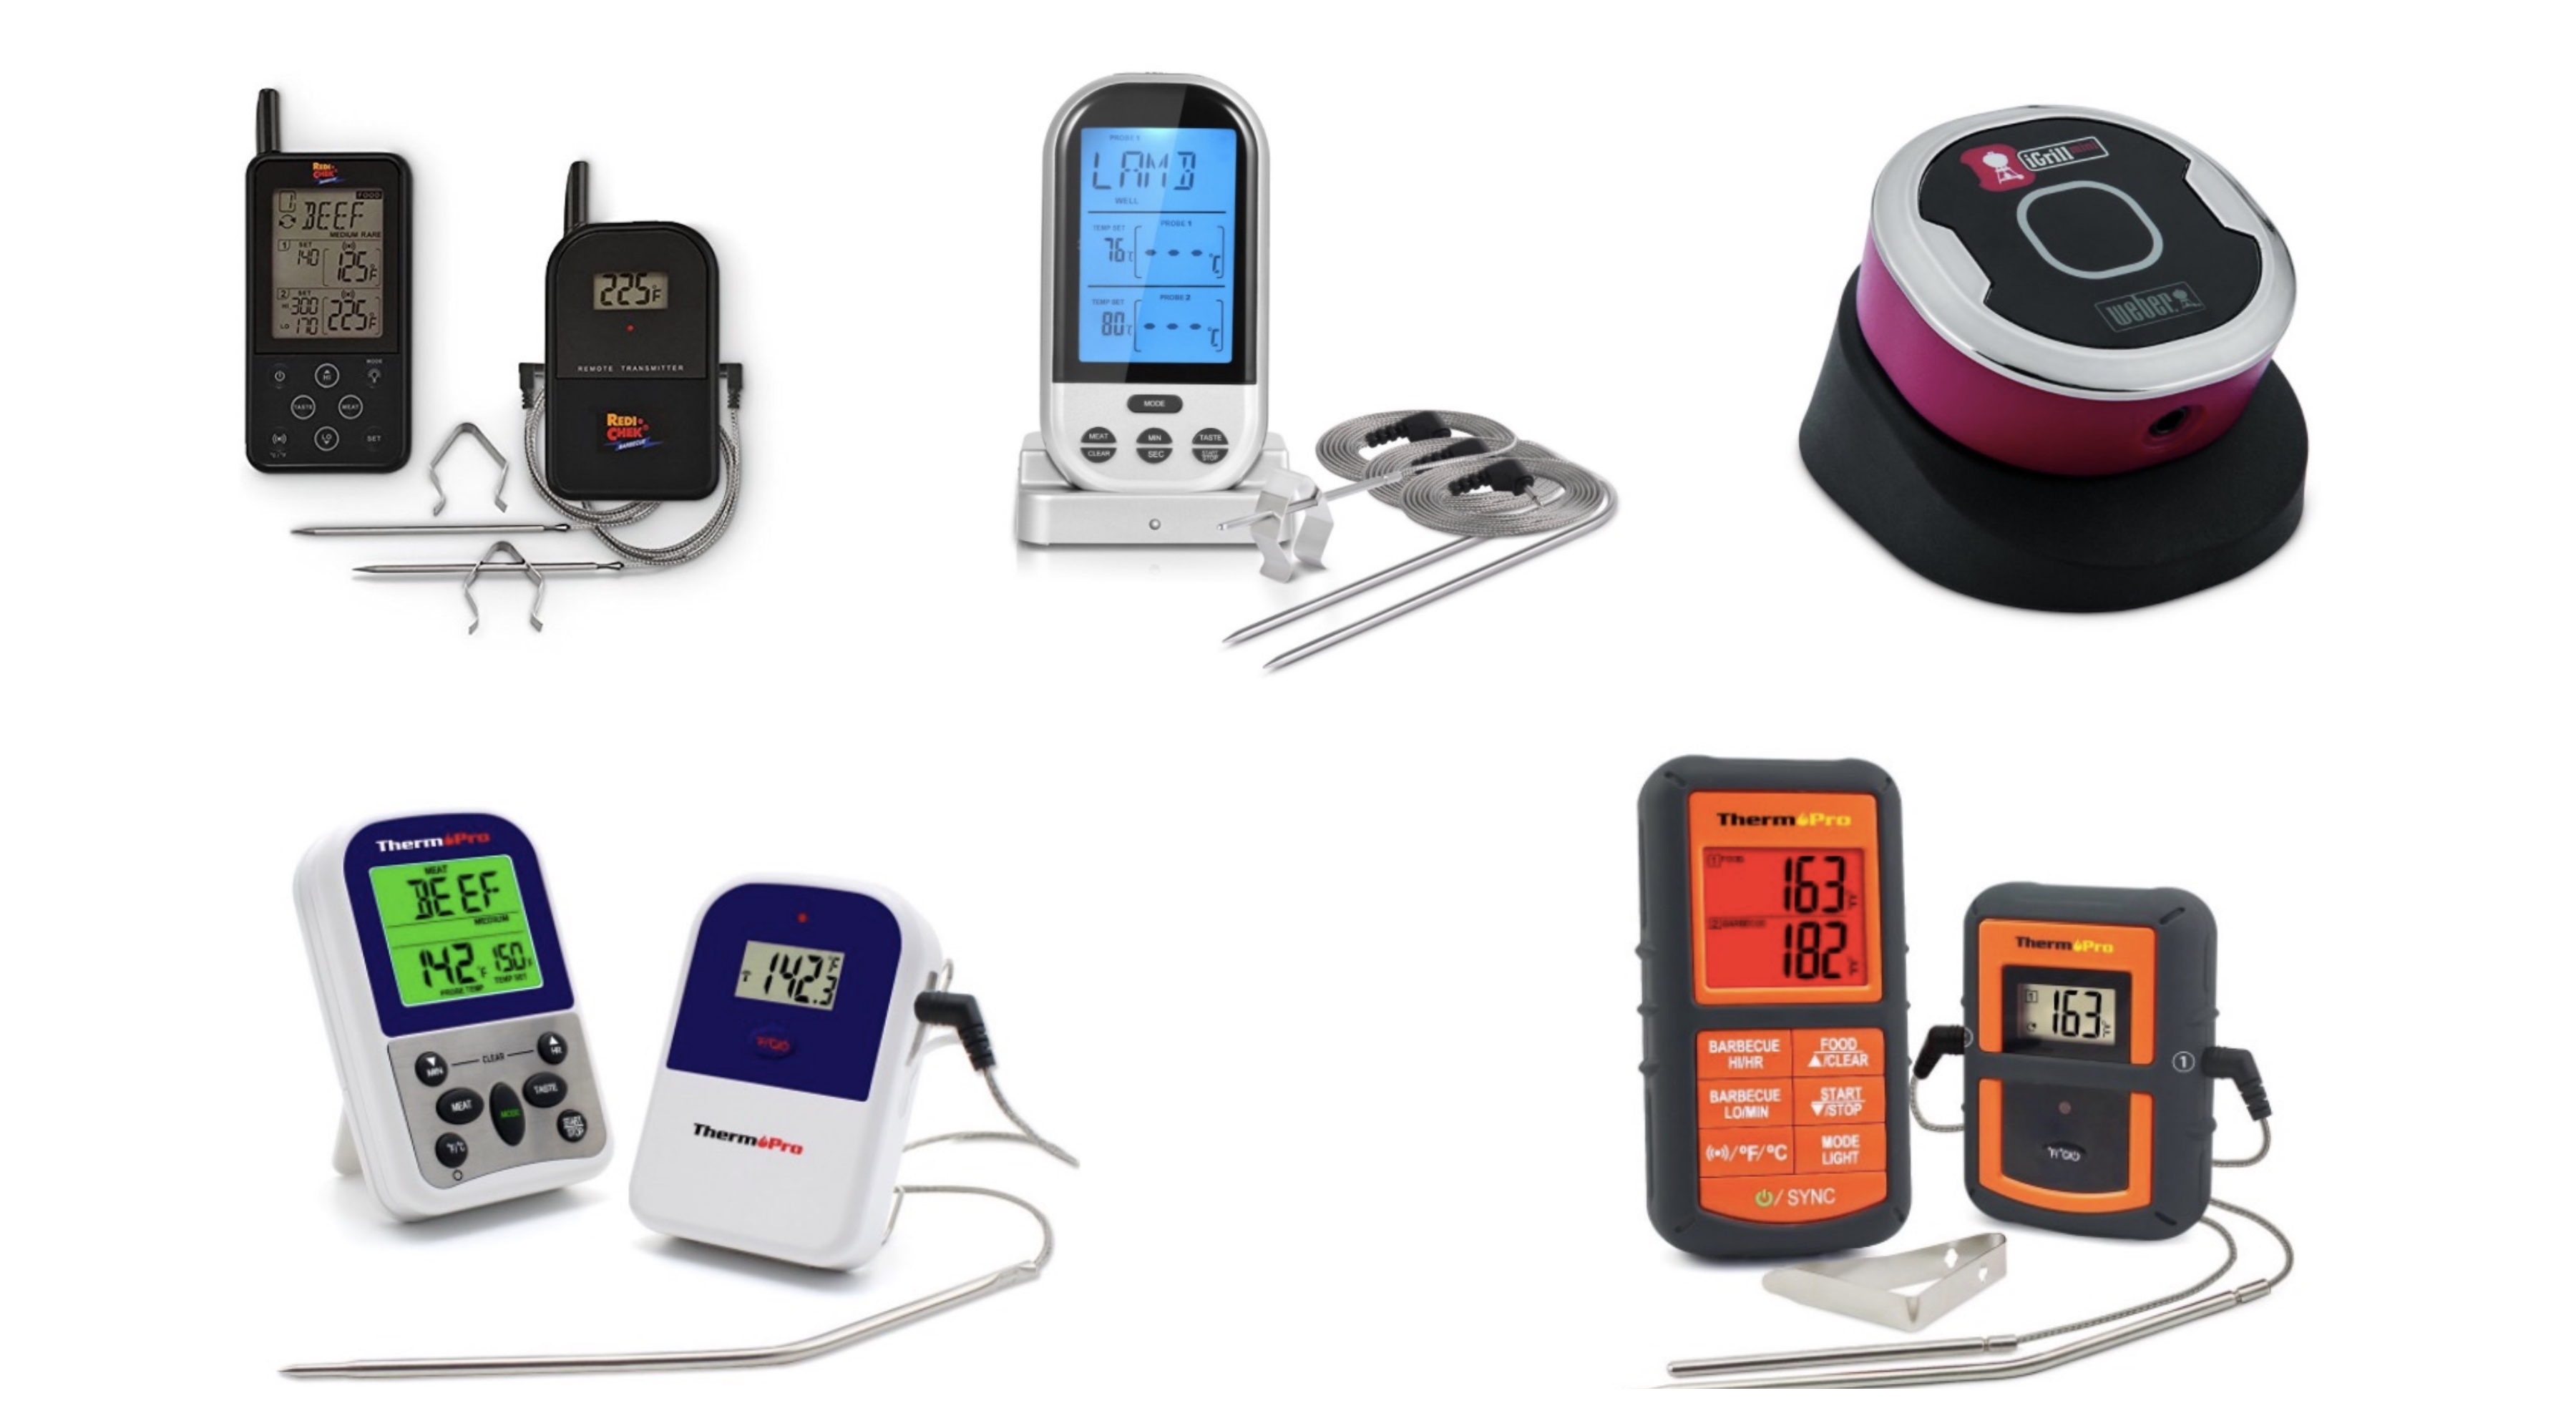 The 10 Best Wireless Meat Thermometers Of 2018 – BroBible